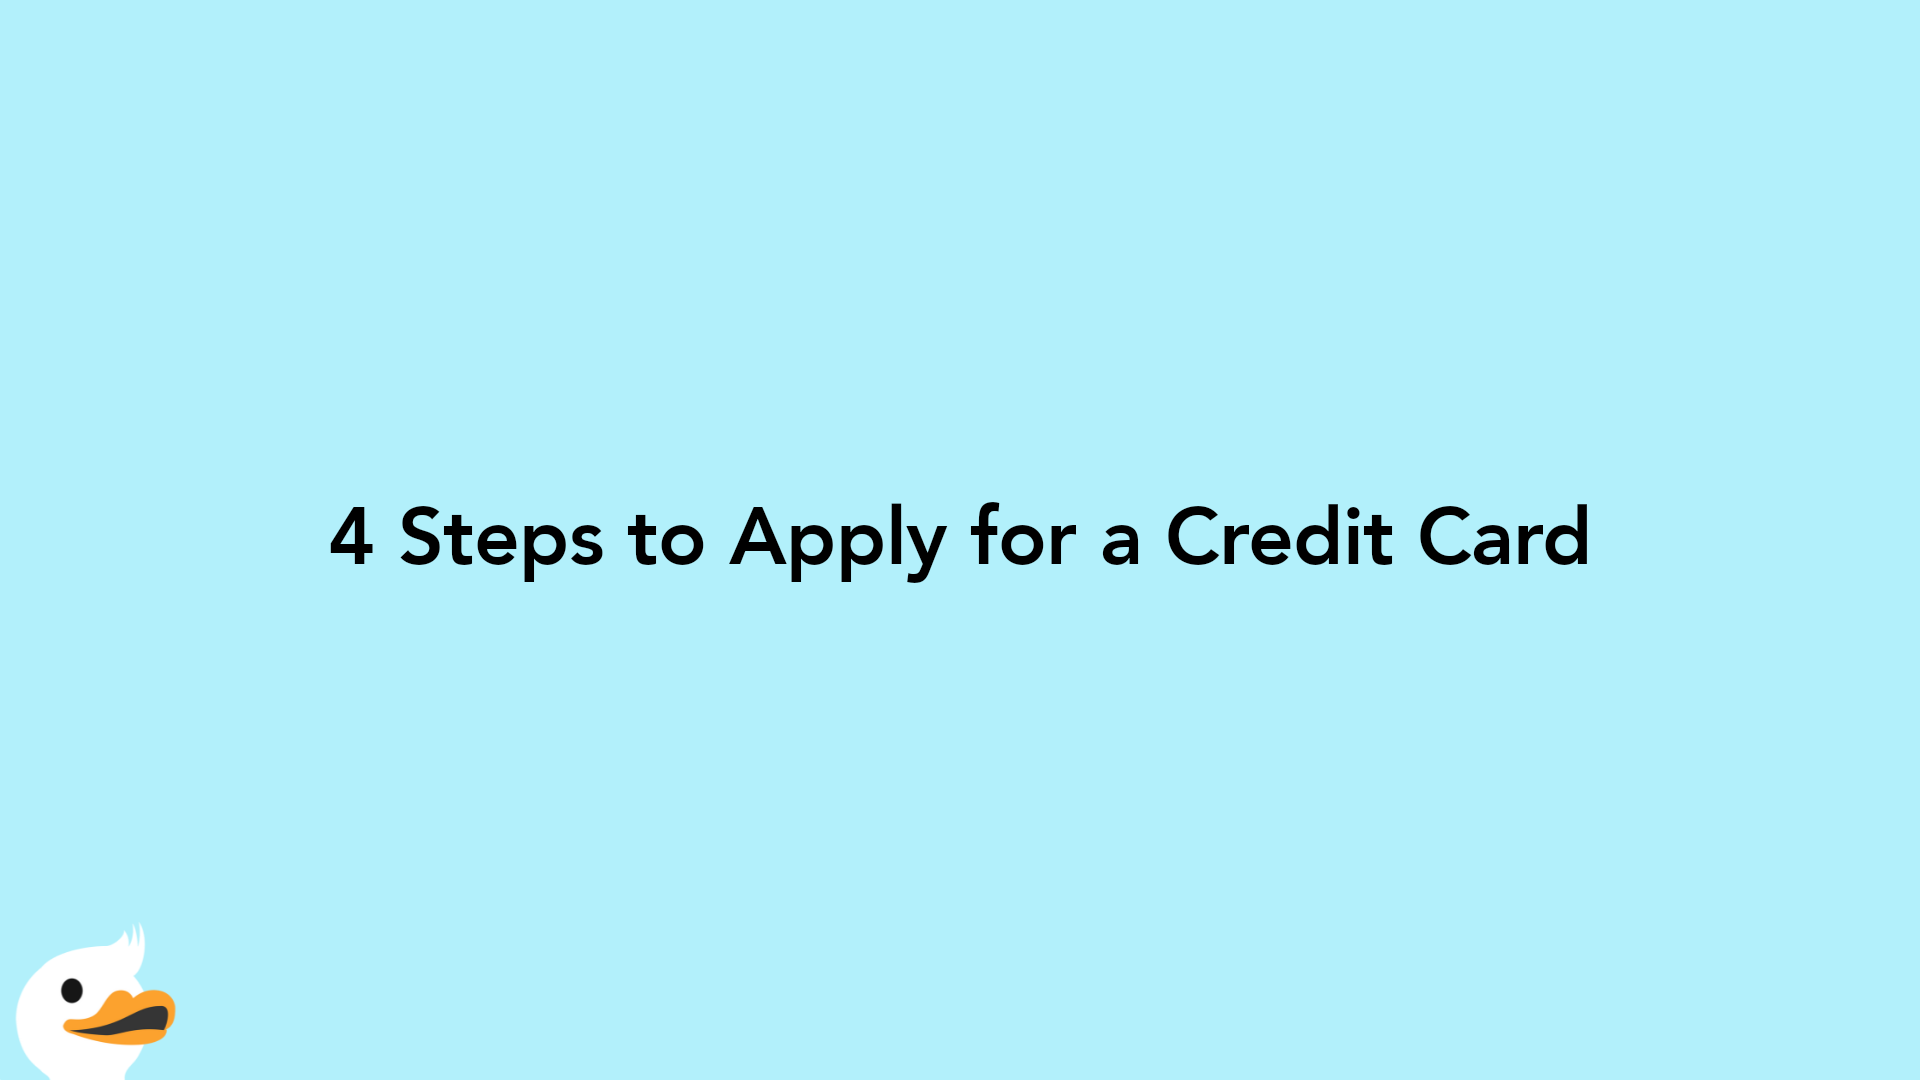 4 Steps to Apply for a Credit Card